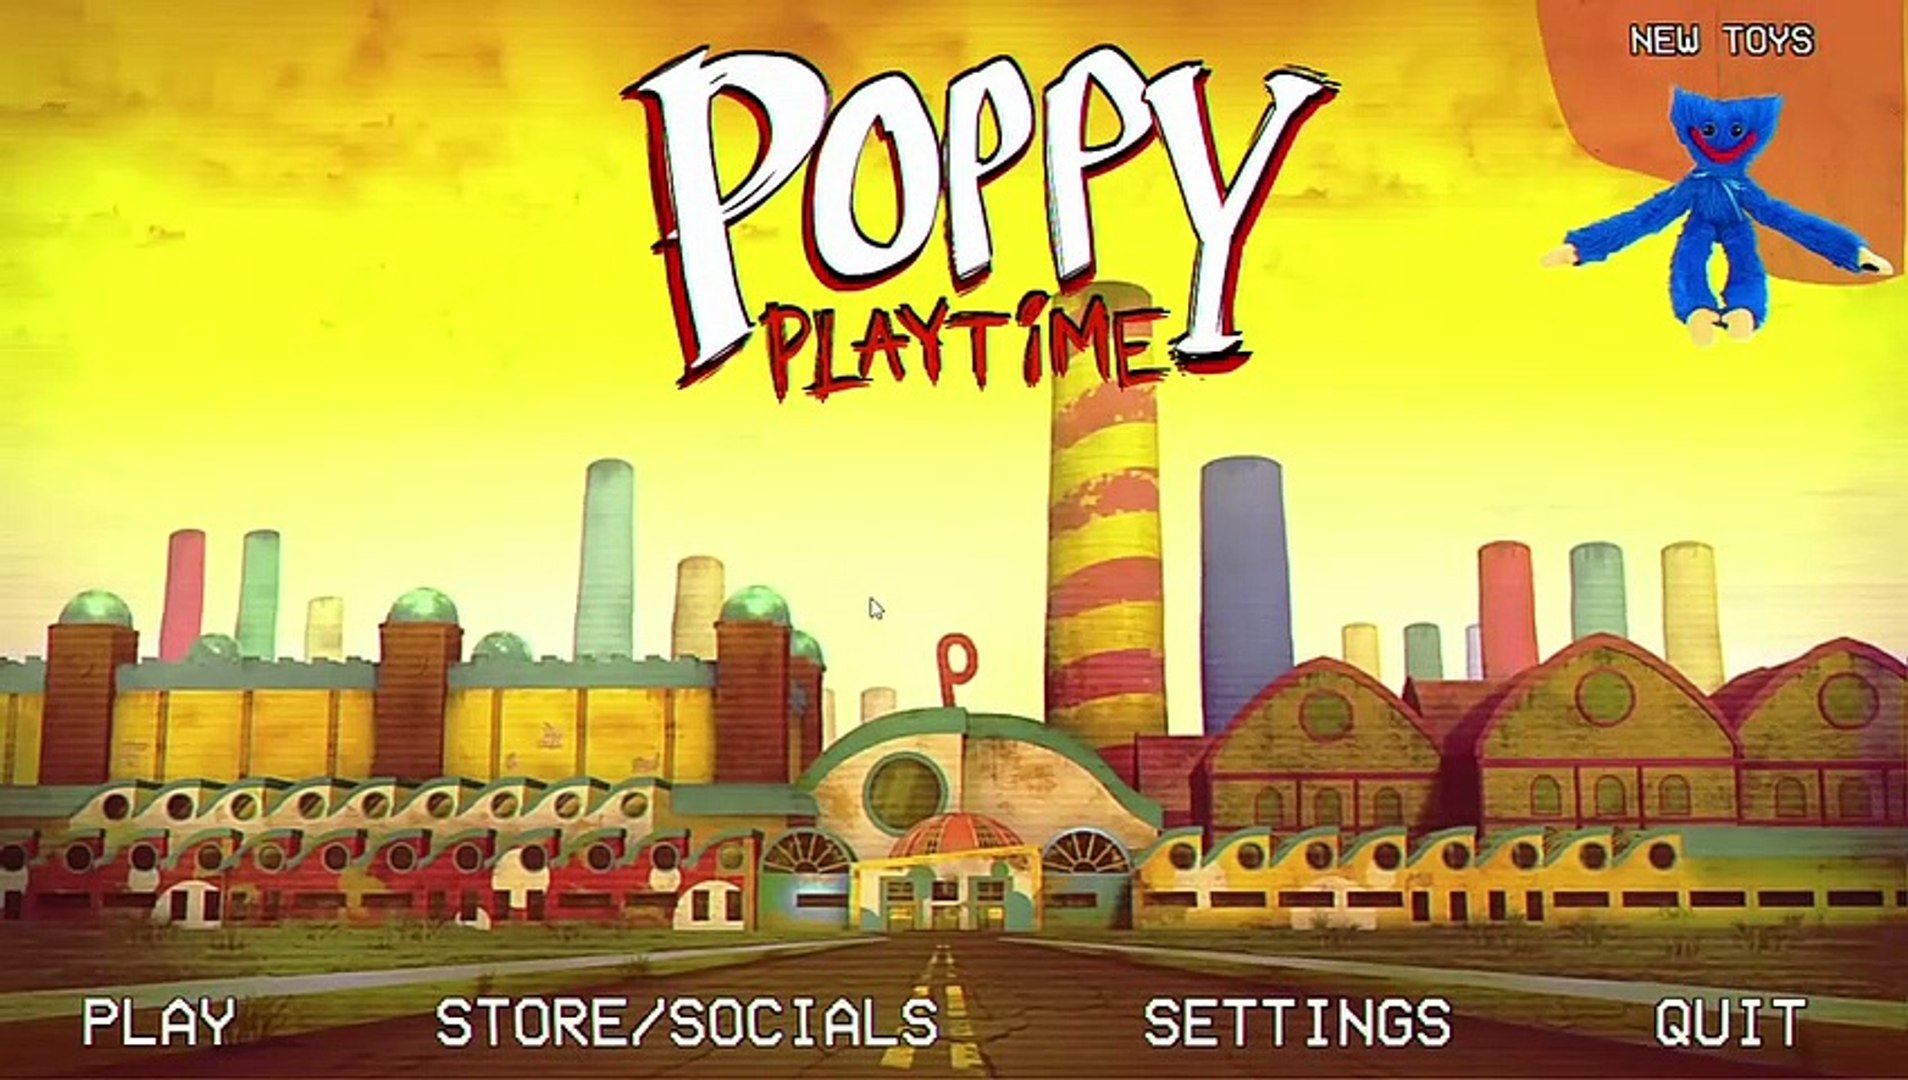 Poppy Playtime in powerpoint Chapter 2. by DiegoA233_YT